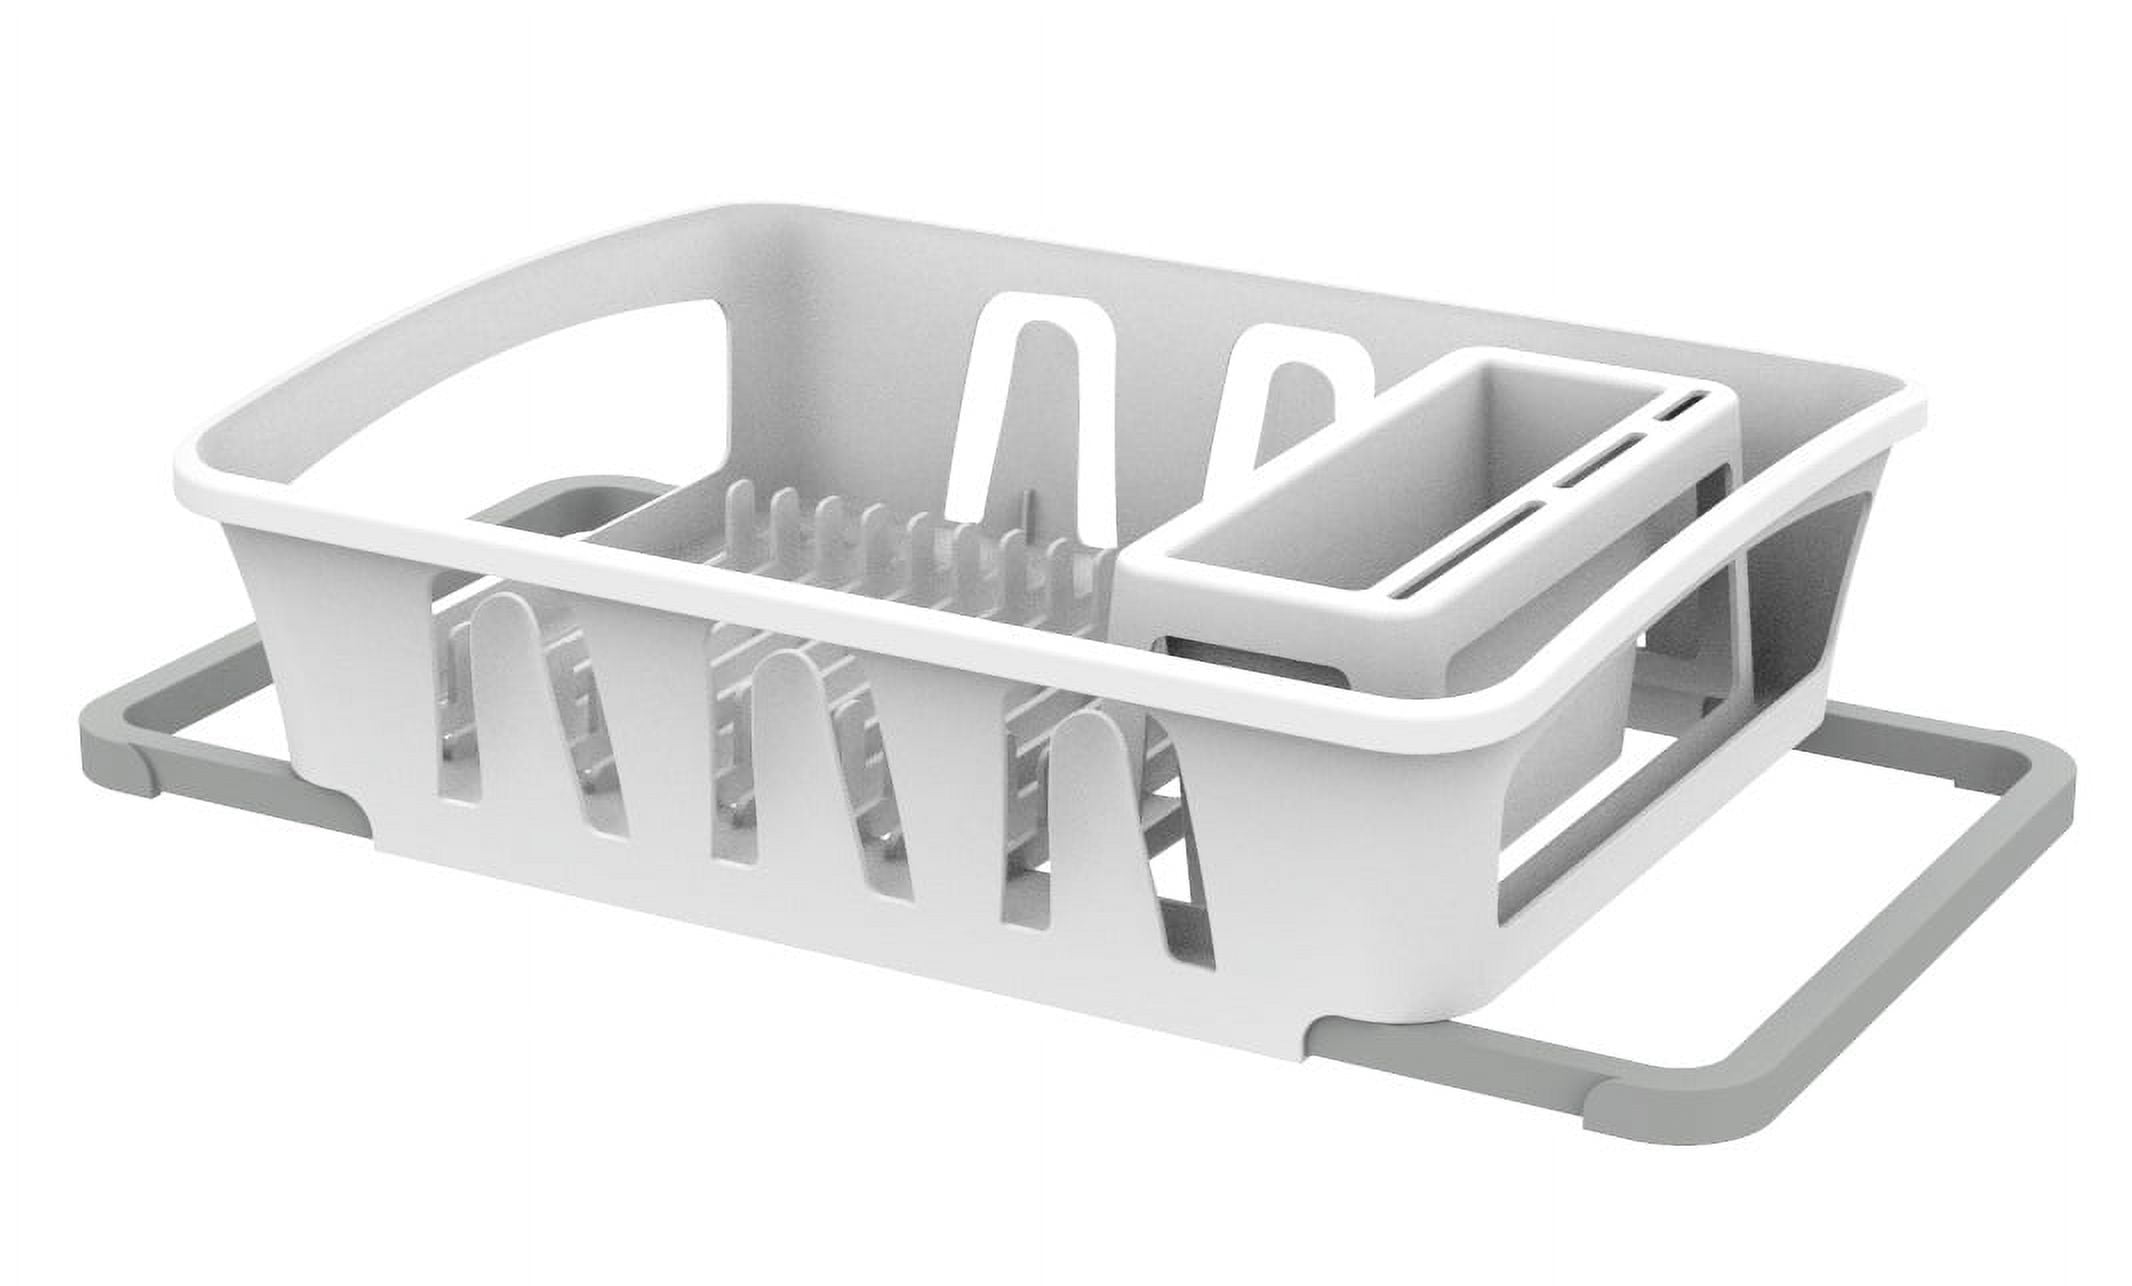 Dish Drying Rack,WLRETMCI Dish Rack Container Expandable 11-19,Small Dish  Rack Dish Drainer with Drainboard ,Utensil Holder for Kitchen Counter